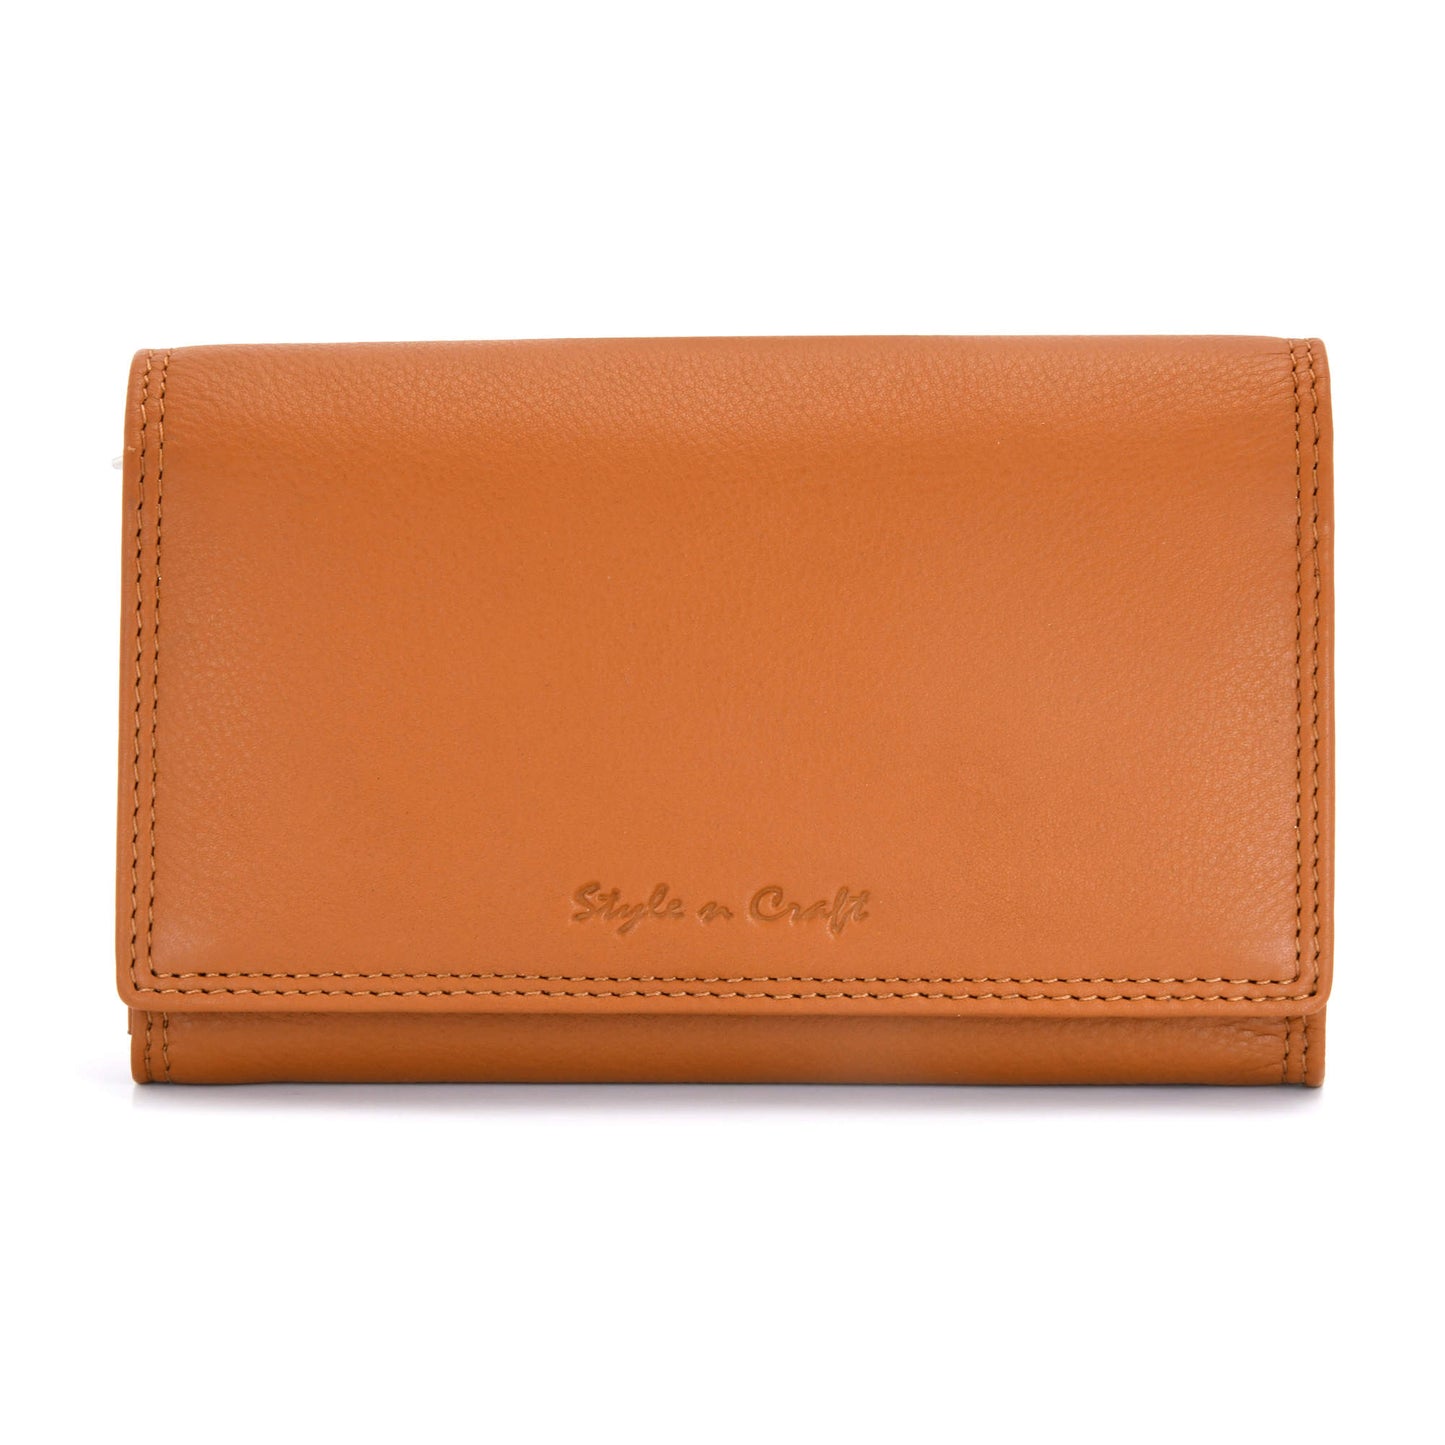 Style n Craft 300953-CG Ladies Clutch Wallet in Leather in Tan Color with RFID Protection - Front closed View